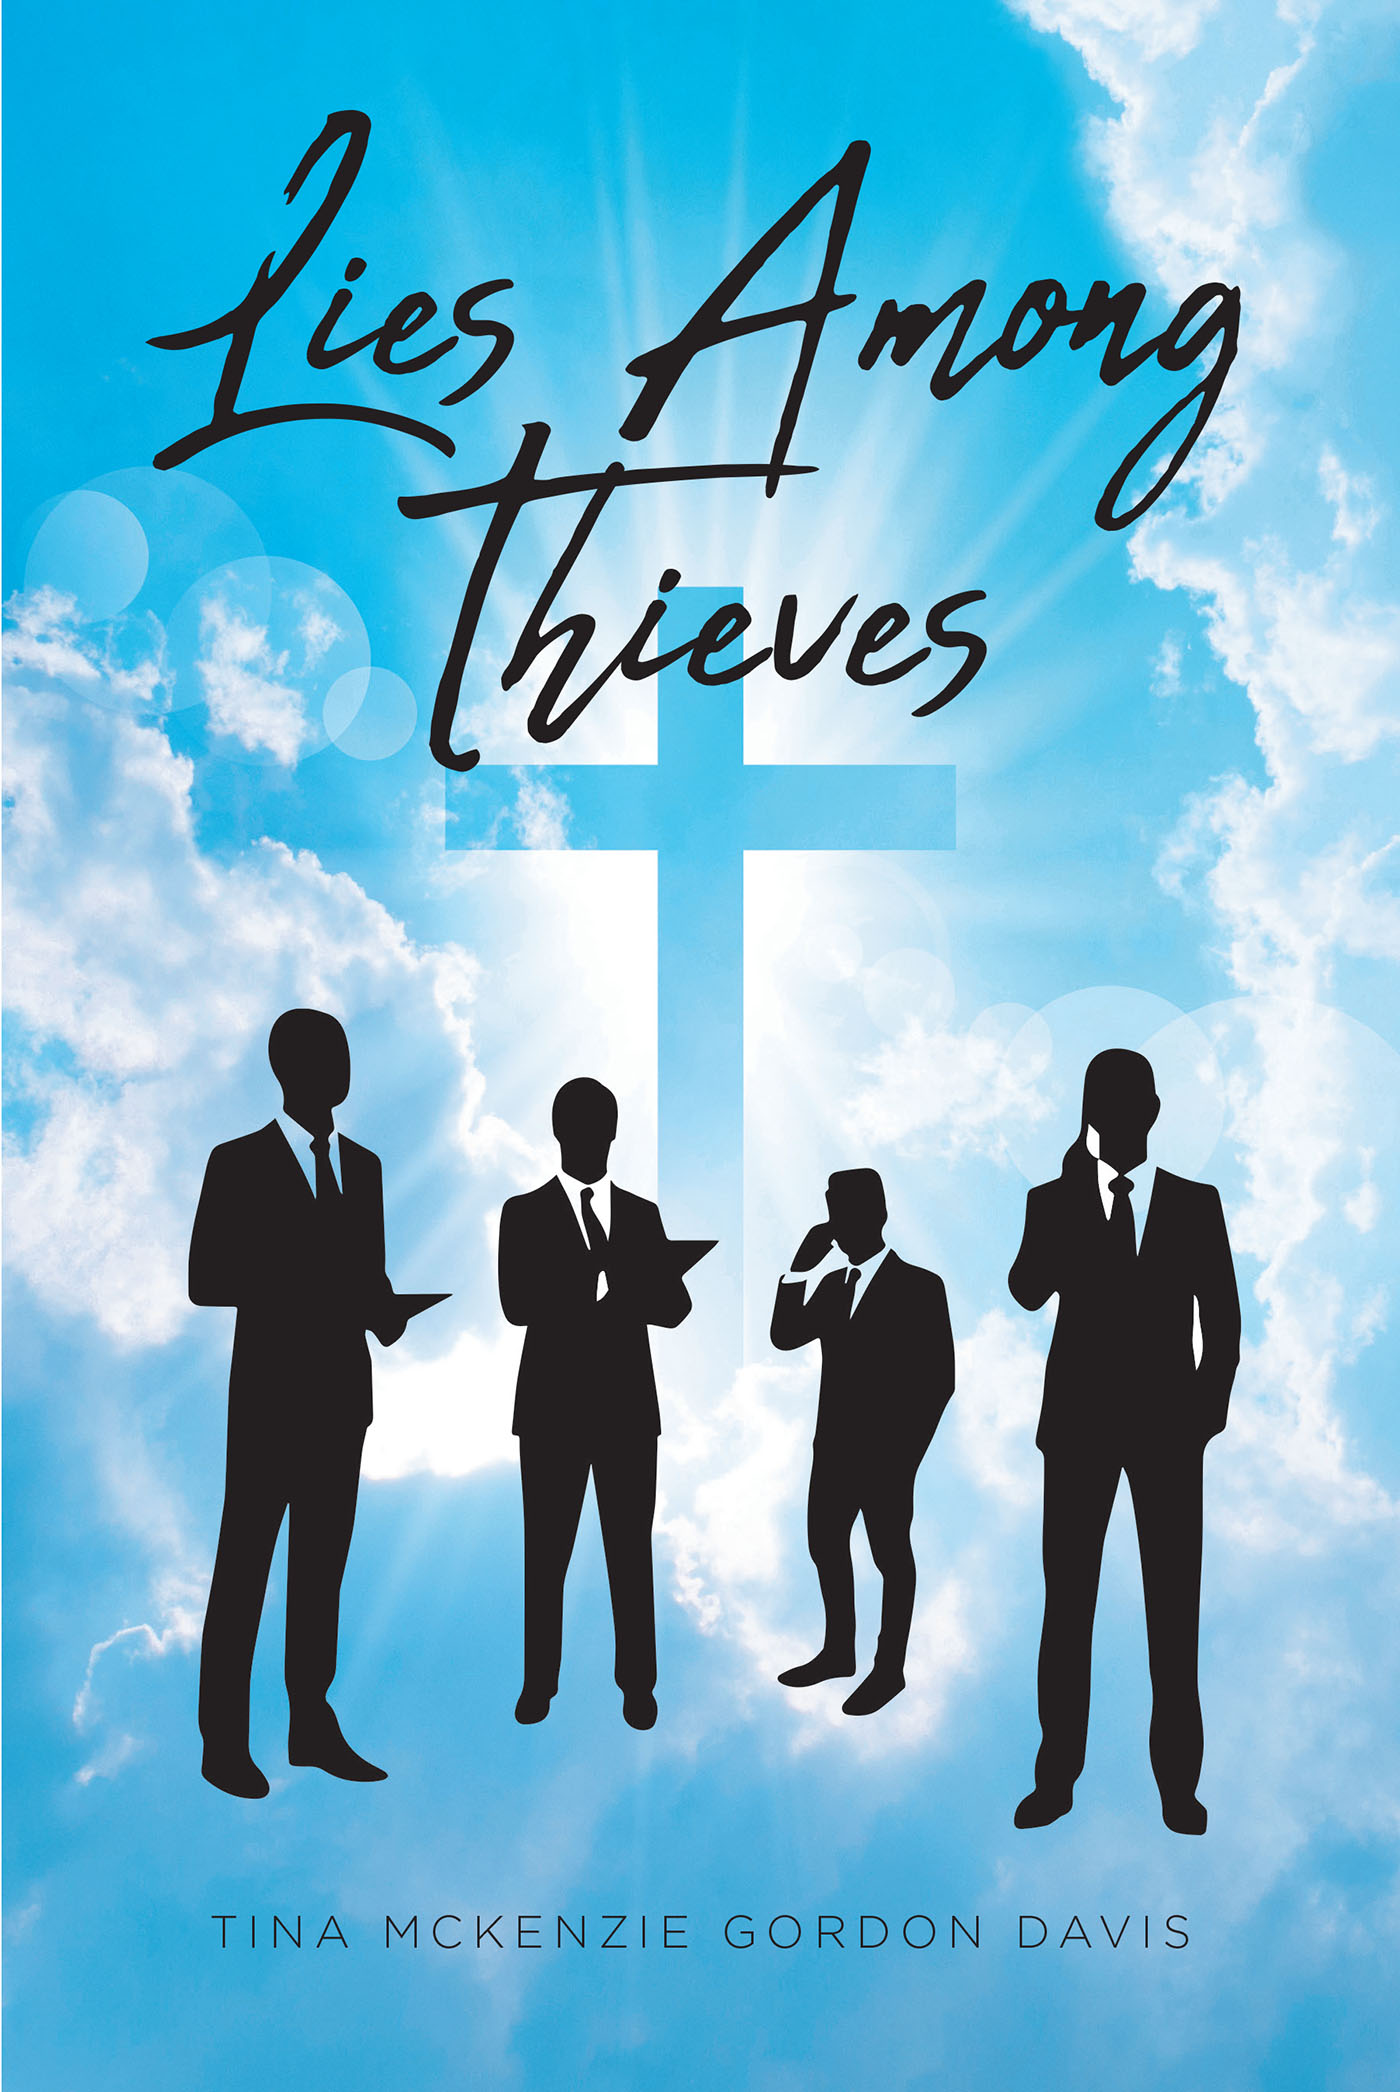 Tina McKenzie Gordon Davis’s New Book, “Lies Among Thieves,” is a Gripping Tale That Explores the Truths, Secrets, and Lies That the Church Pulpit Often Holds